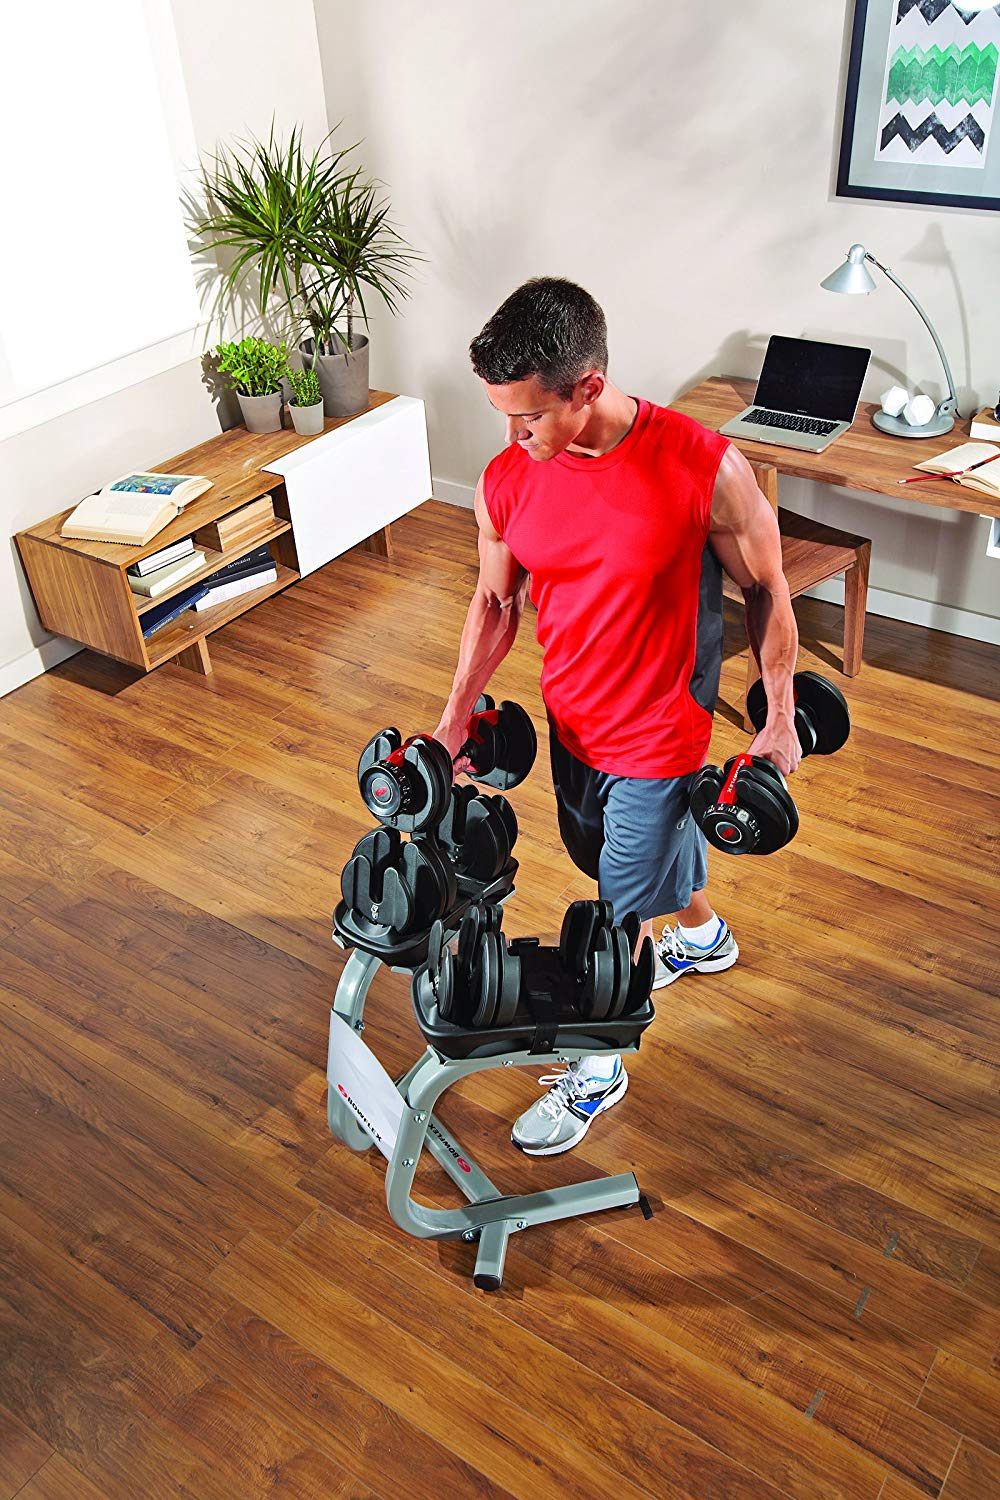 Ugly Home Gyms, Be Gone—Designer-Approved Equipment Is Here to Stay